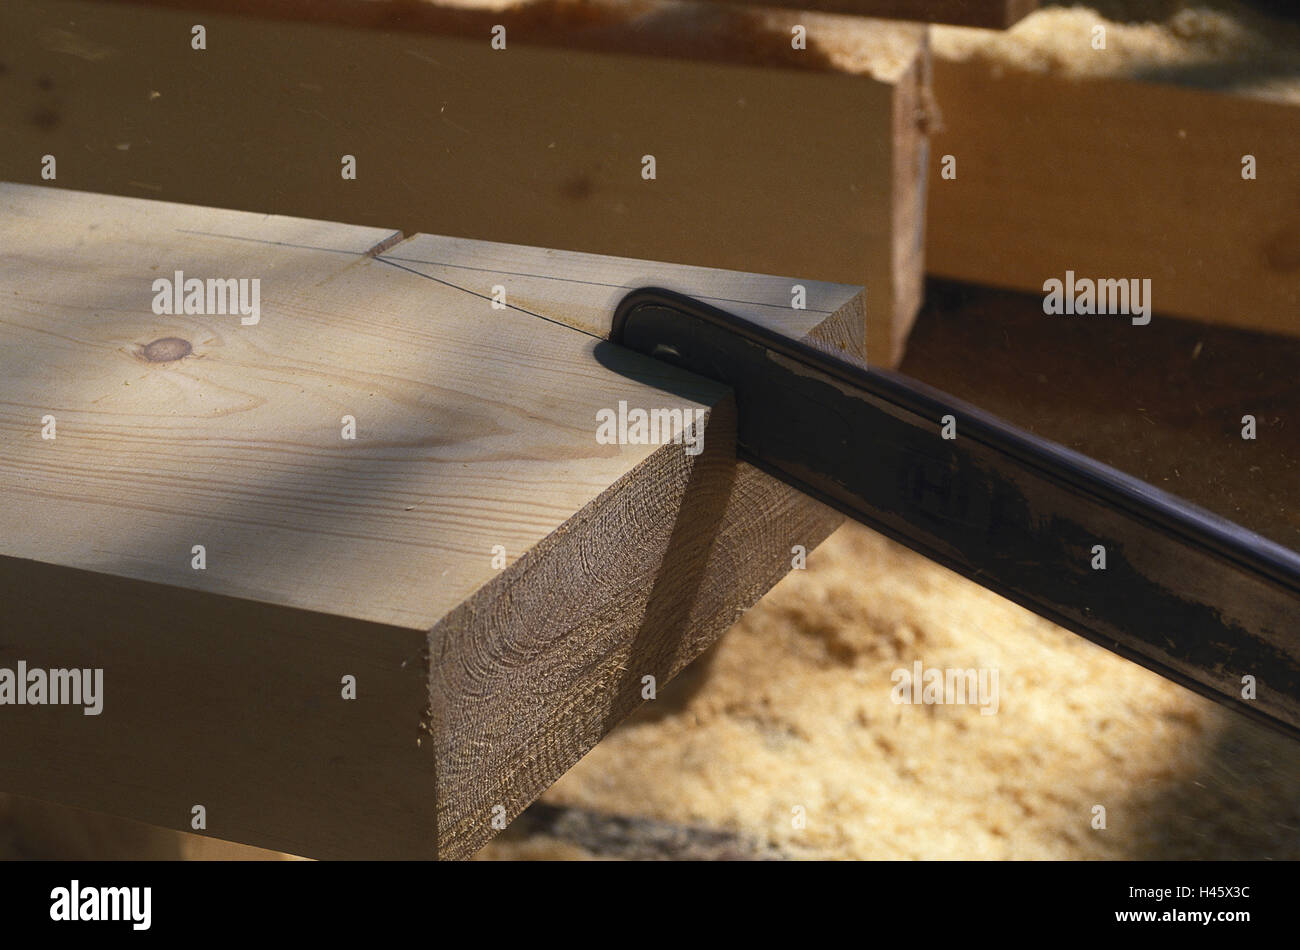 wooden beams, chain saw, saw, detail, men at work, build, wooden, beam, pine, craft, do wooden, Stock Photo